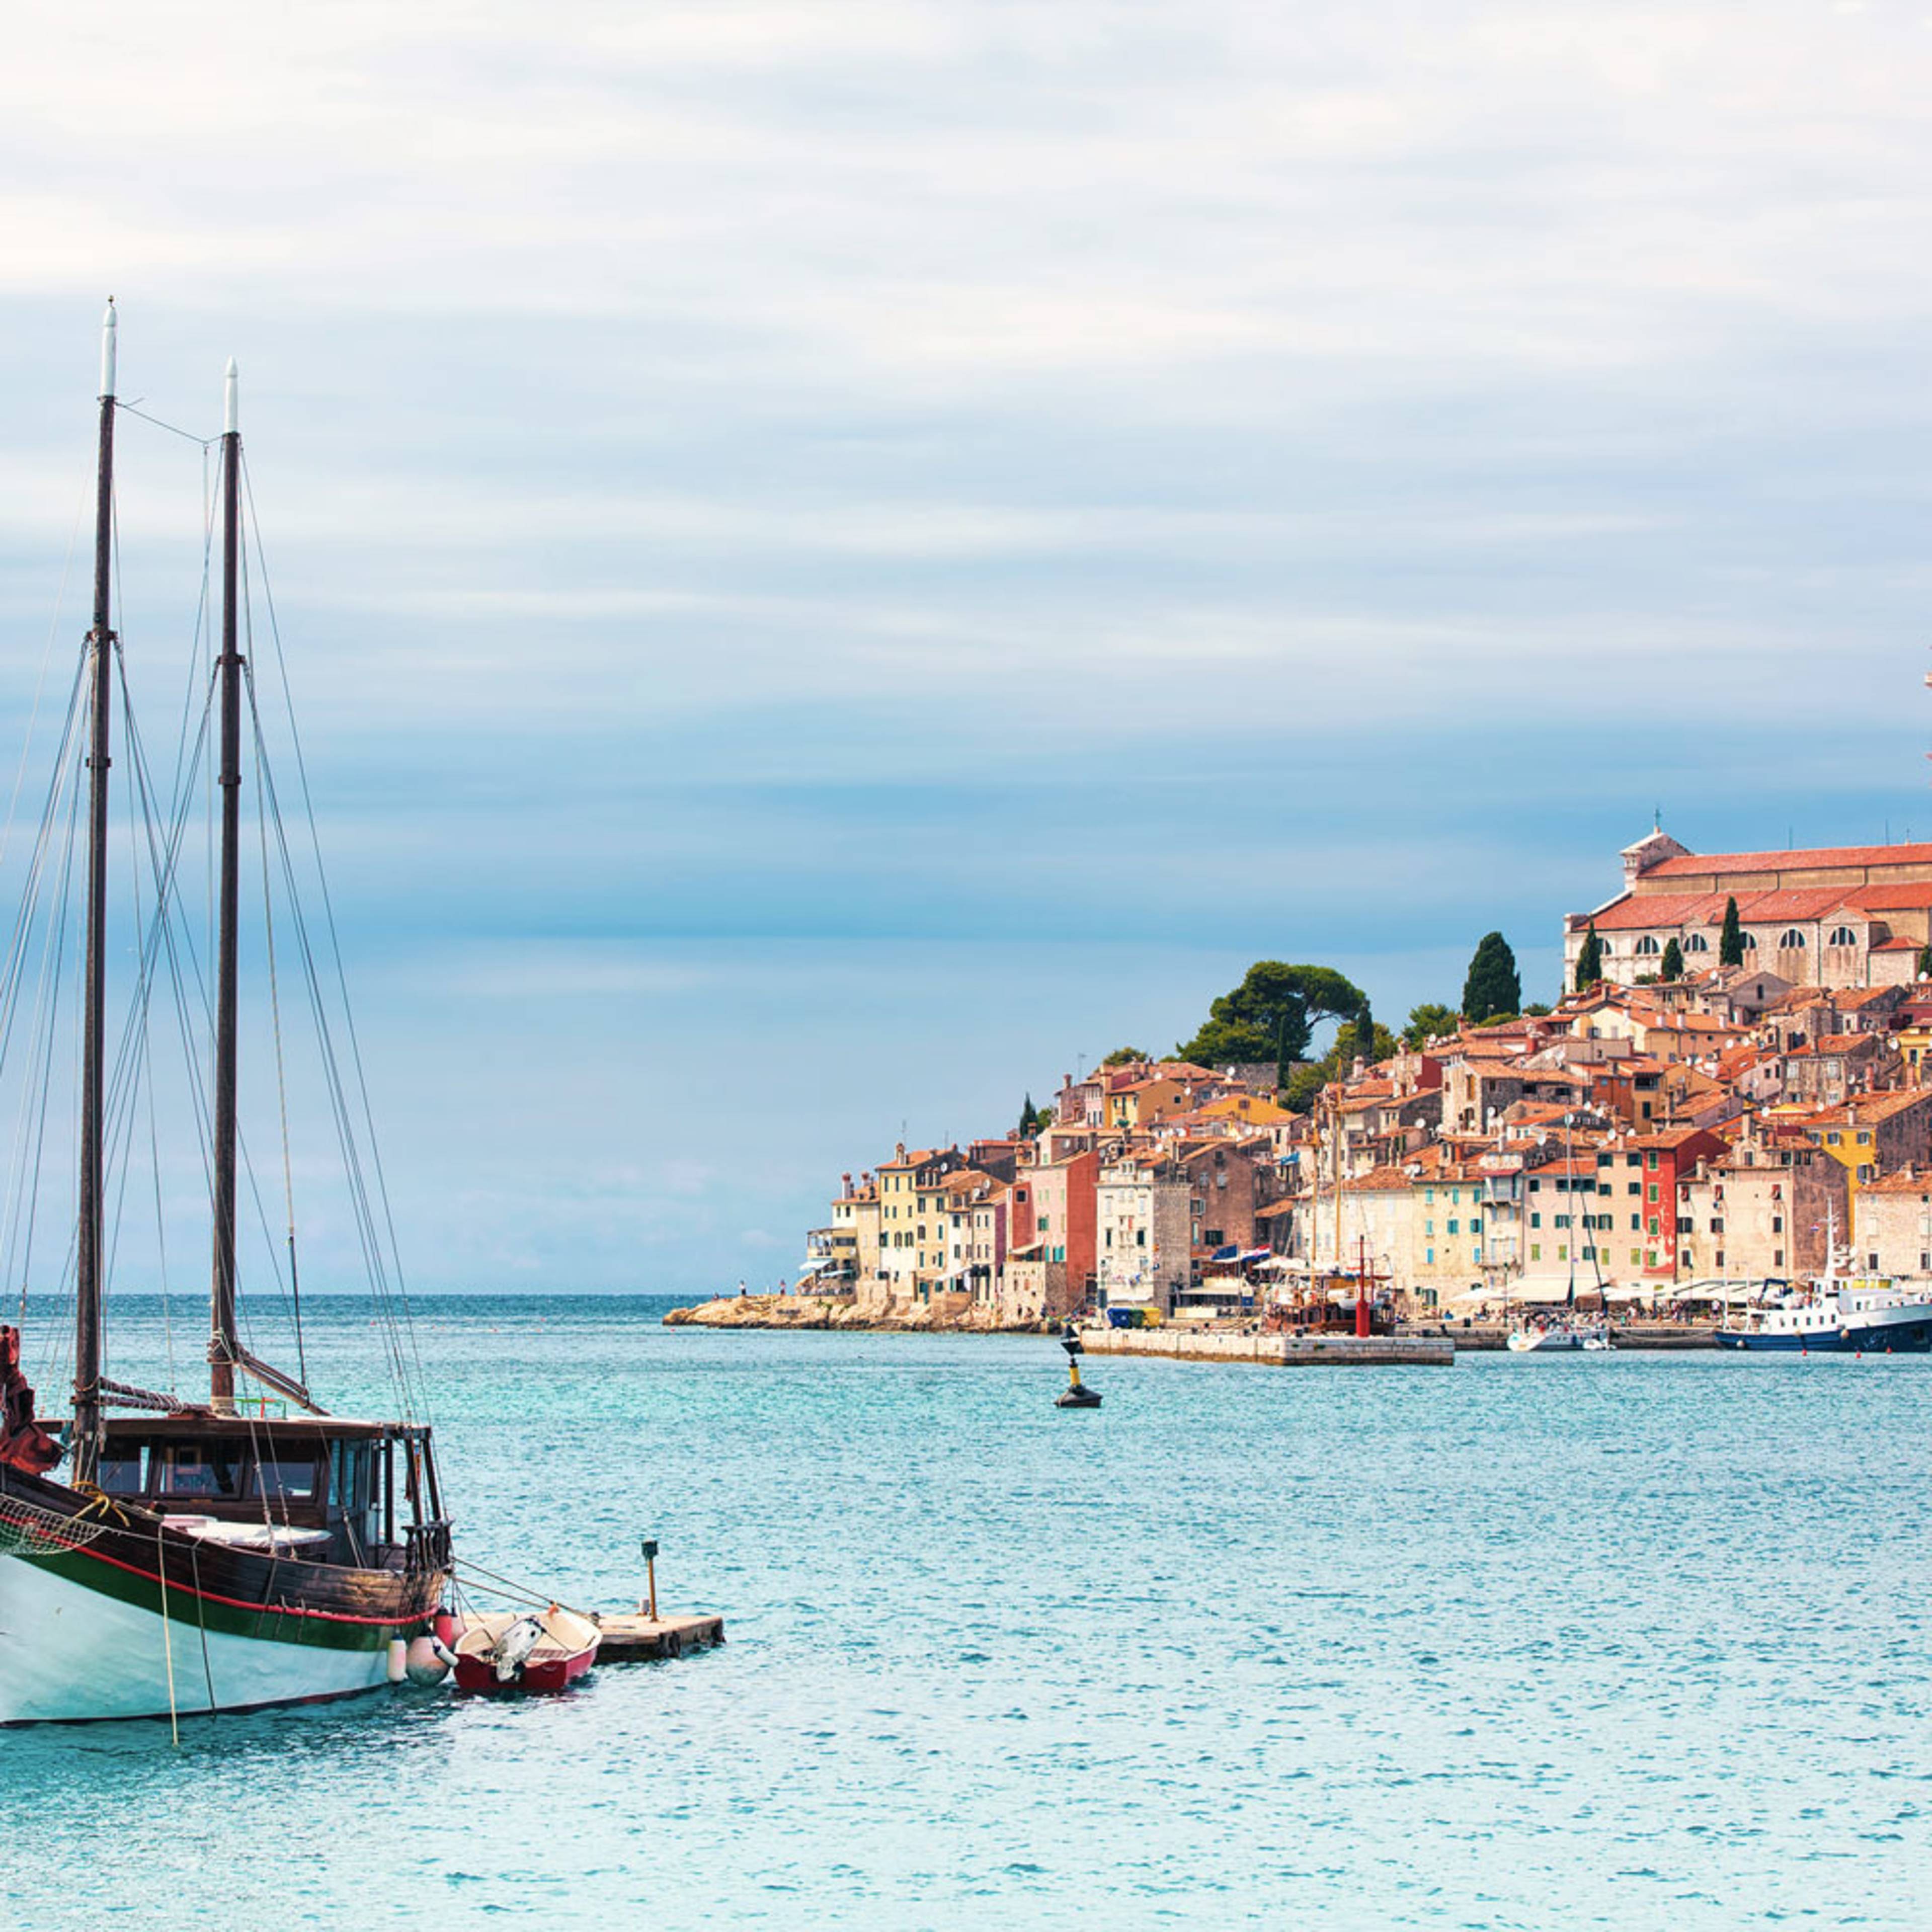 Design your perfect city tour with a local expert in Croatia